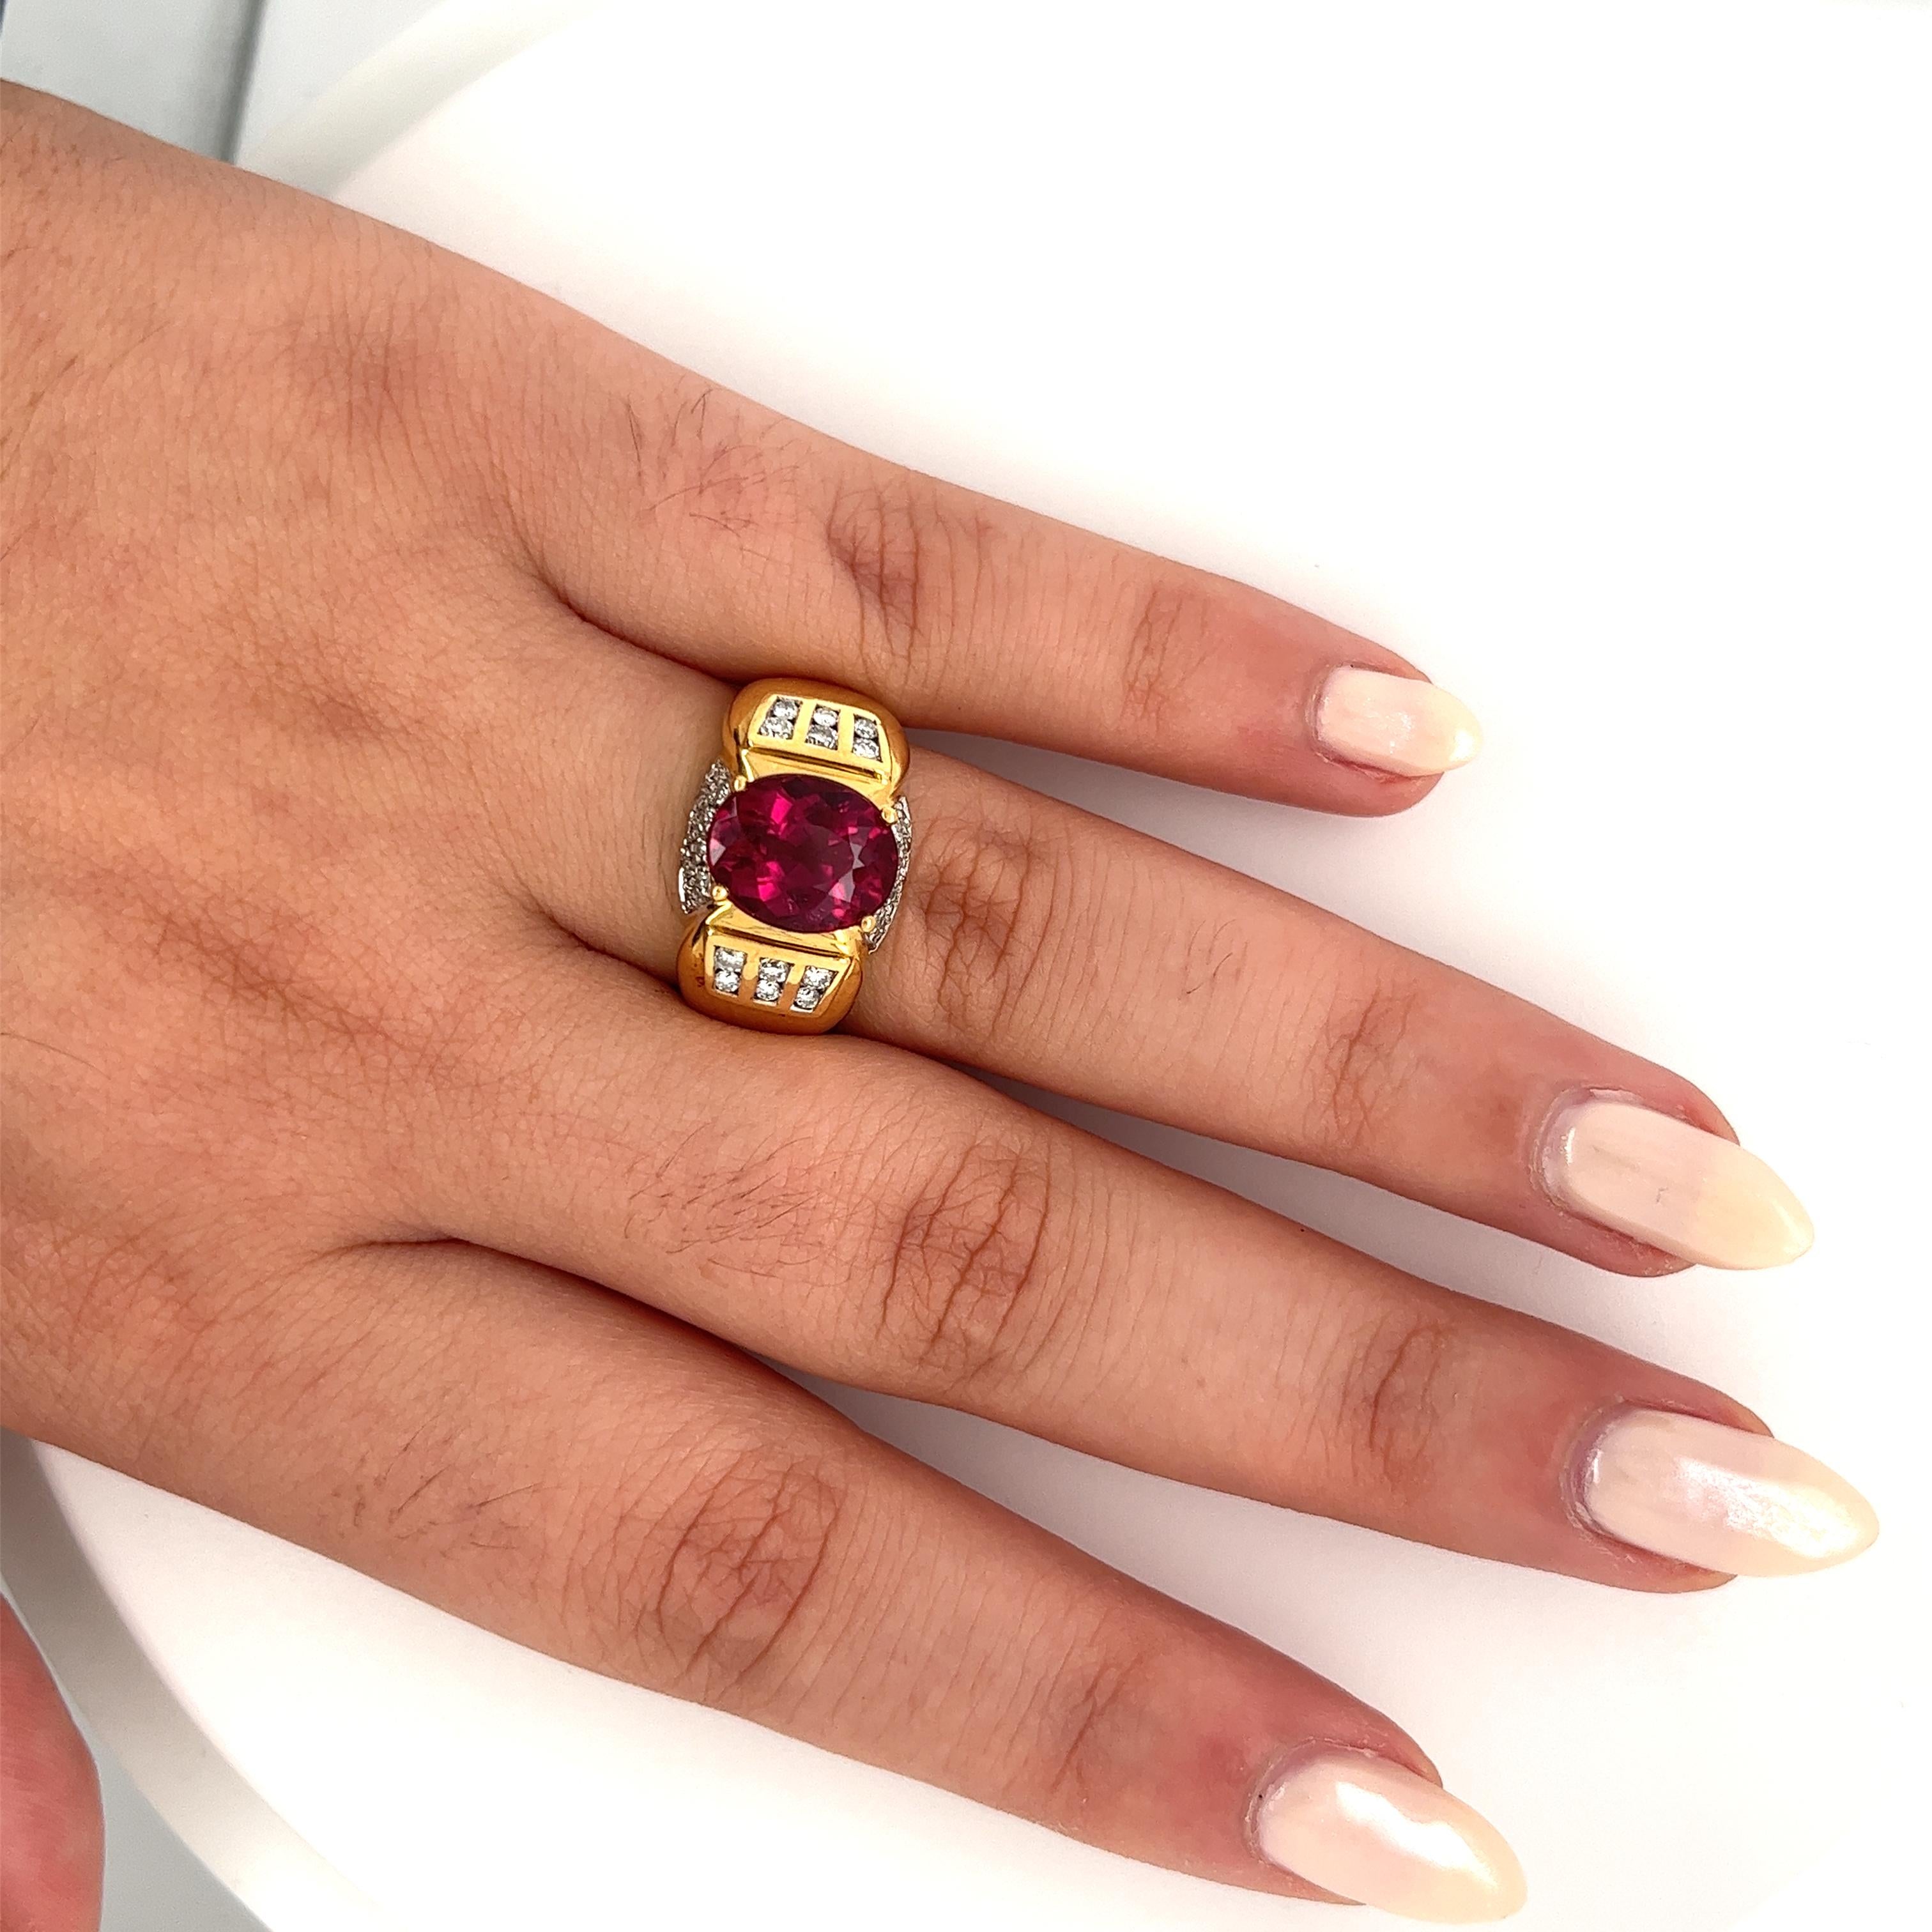 Vintage semi-precious gemstone ring, featuring a natural oval cut rubellite tourmaline center stone, weighing approx. 4.50 carats. Paired with channel set round cut diamond side stones, this ring boasts a vintage feel with its two-toned 18k yellow